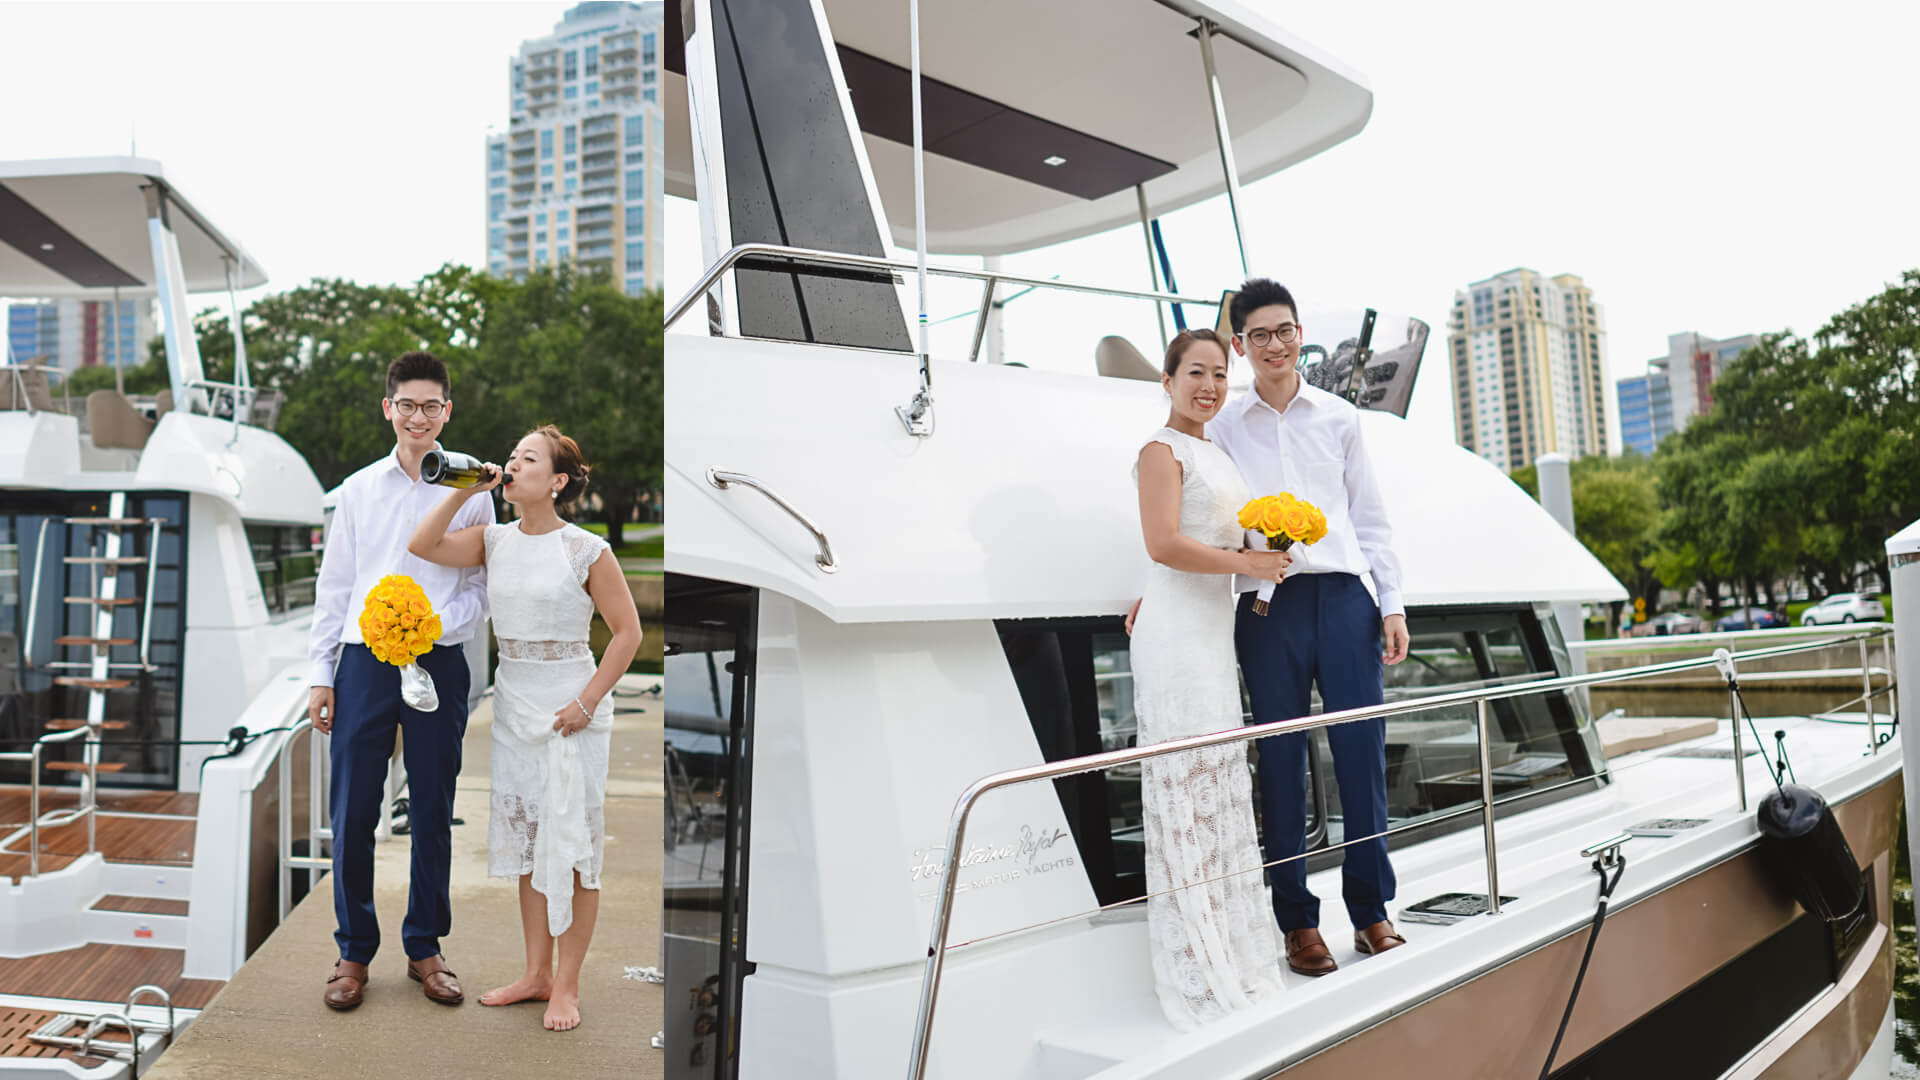 Photo from a yacht wedding in Florida showing couple embarking their boat having fun